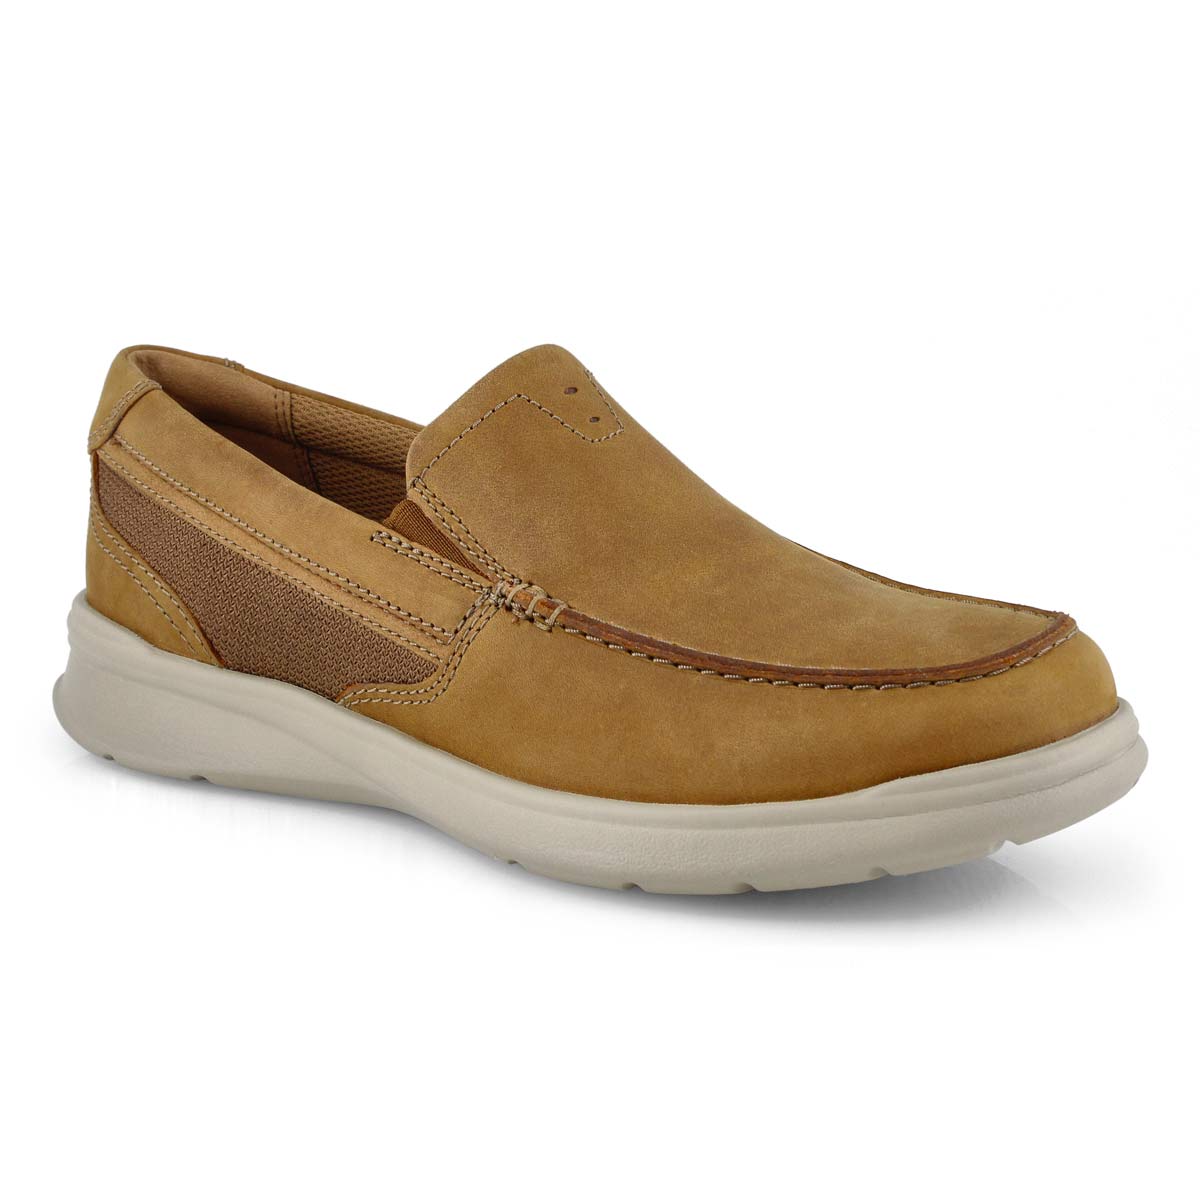 softmoc clarks shoes